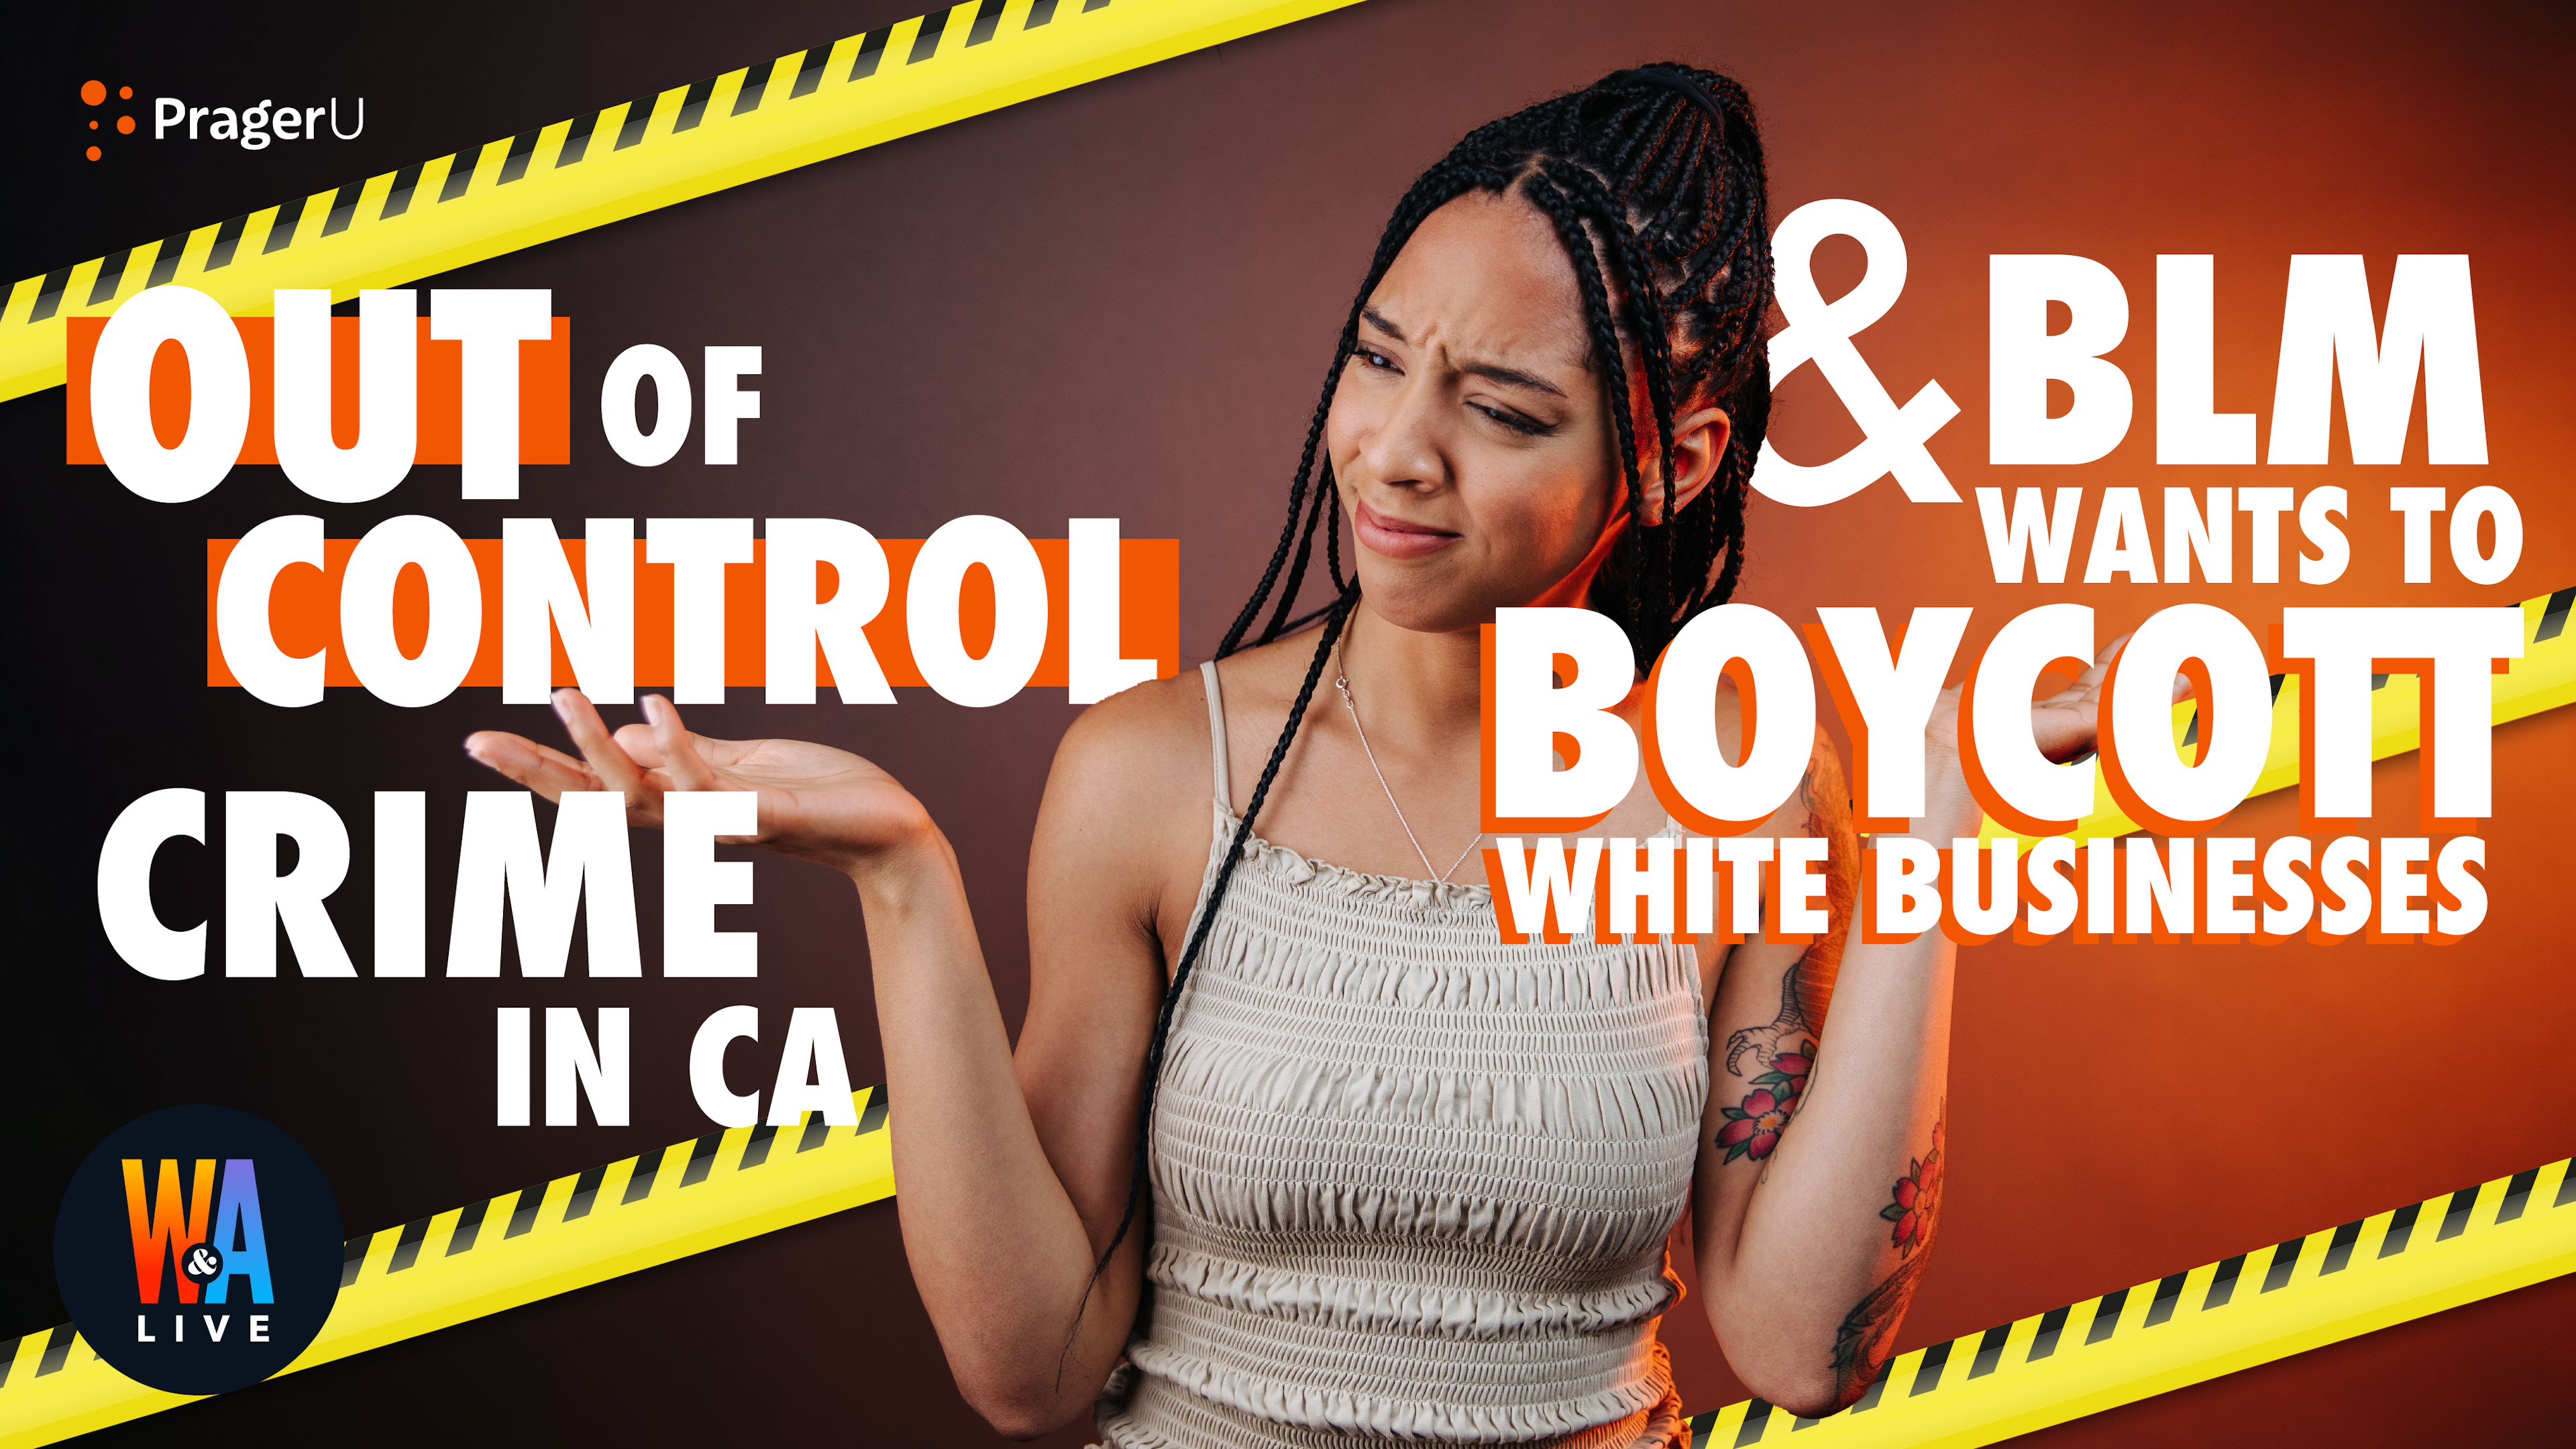 Out of Control Crime in CA & BLM’s Boycott of White Businesses?: 12/6/2021